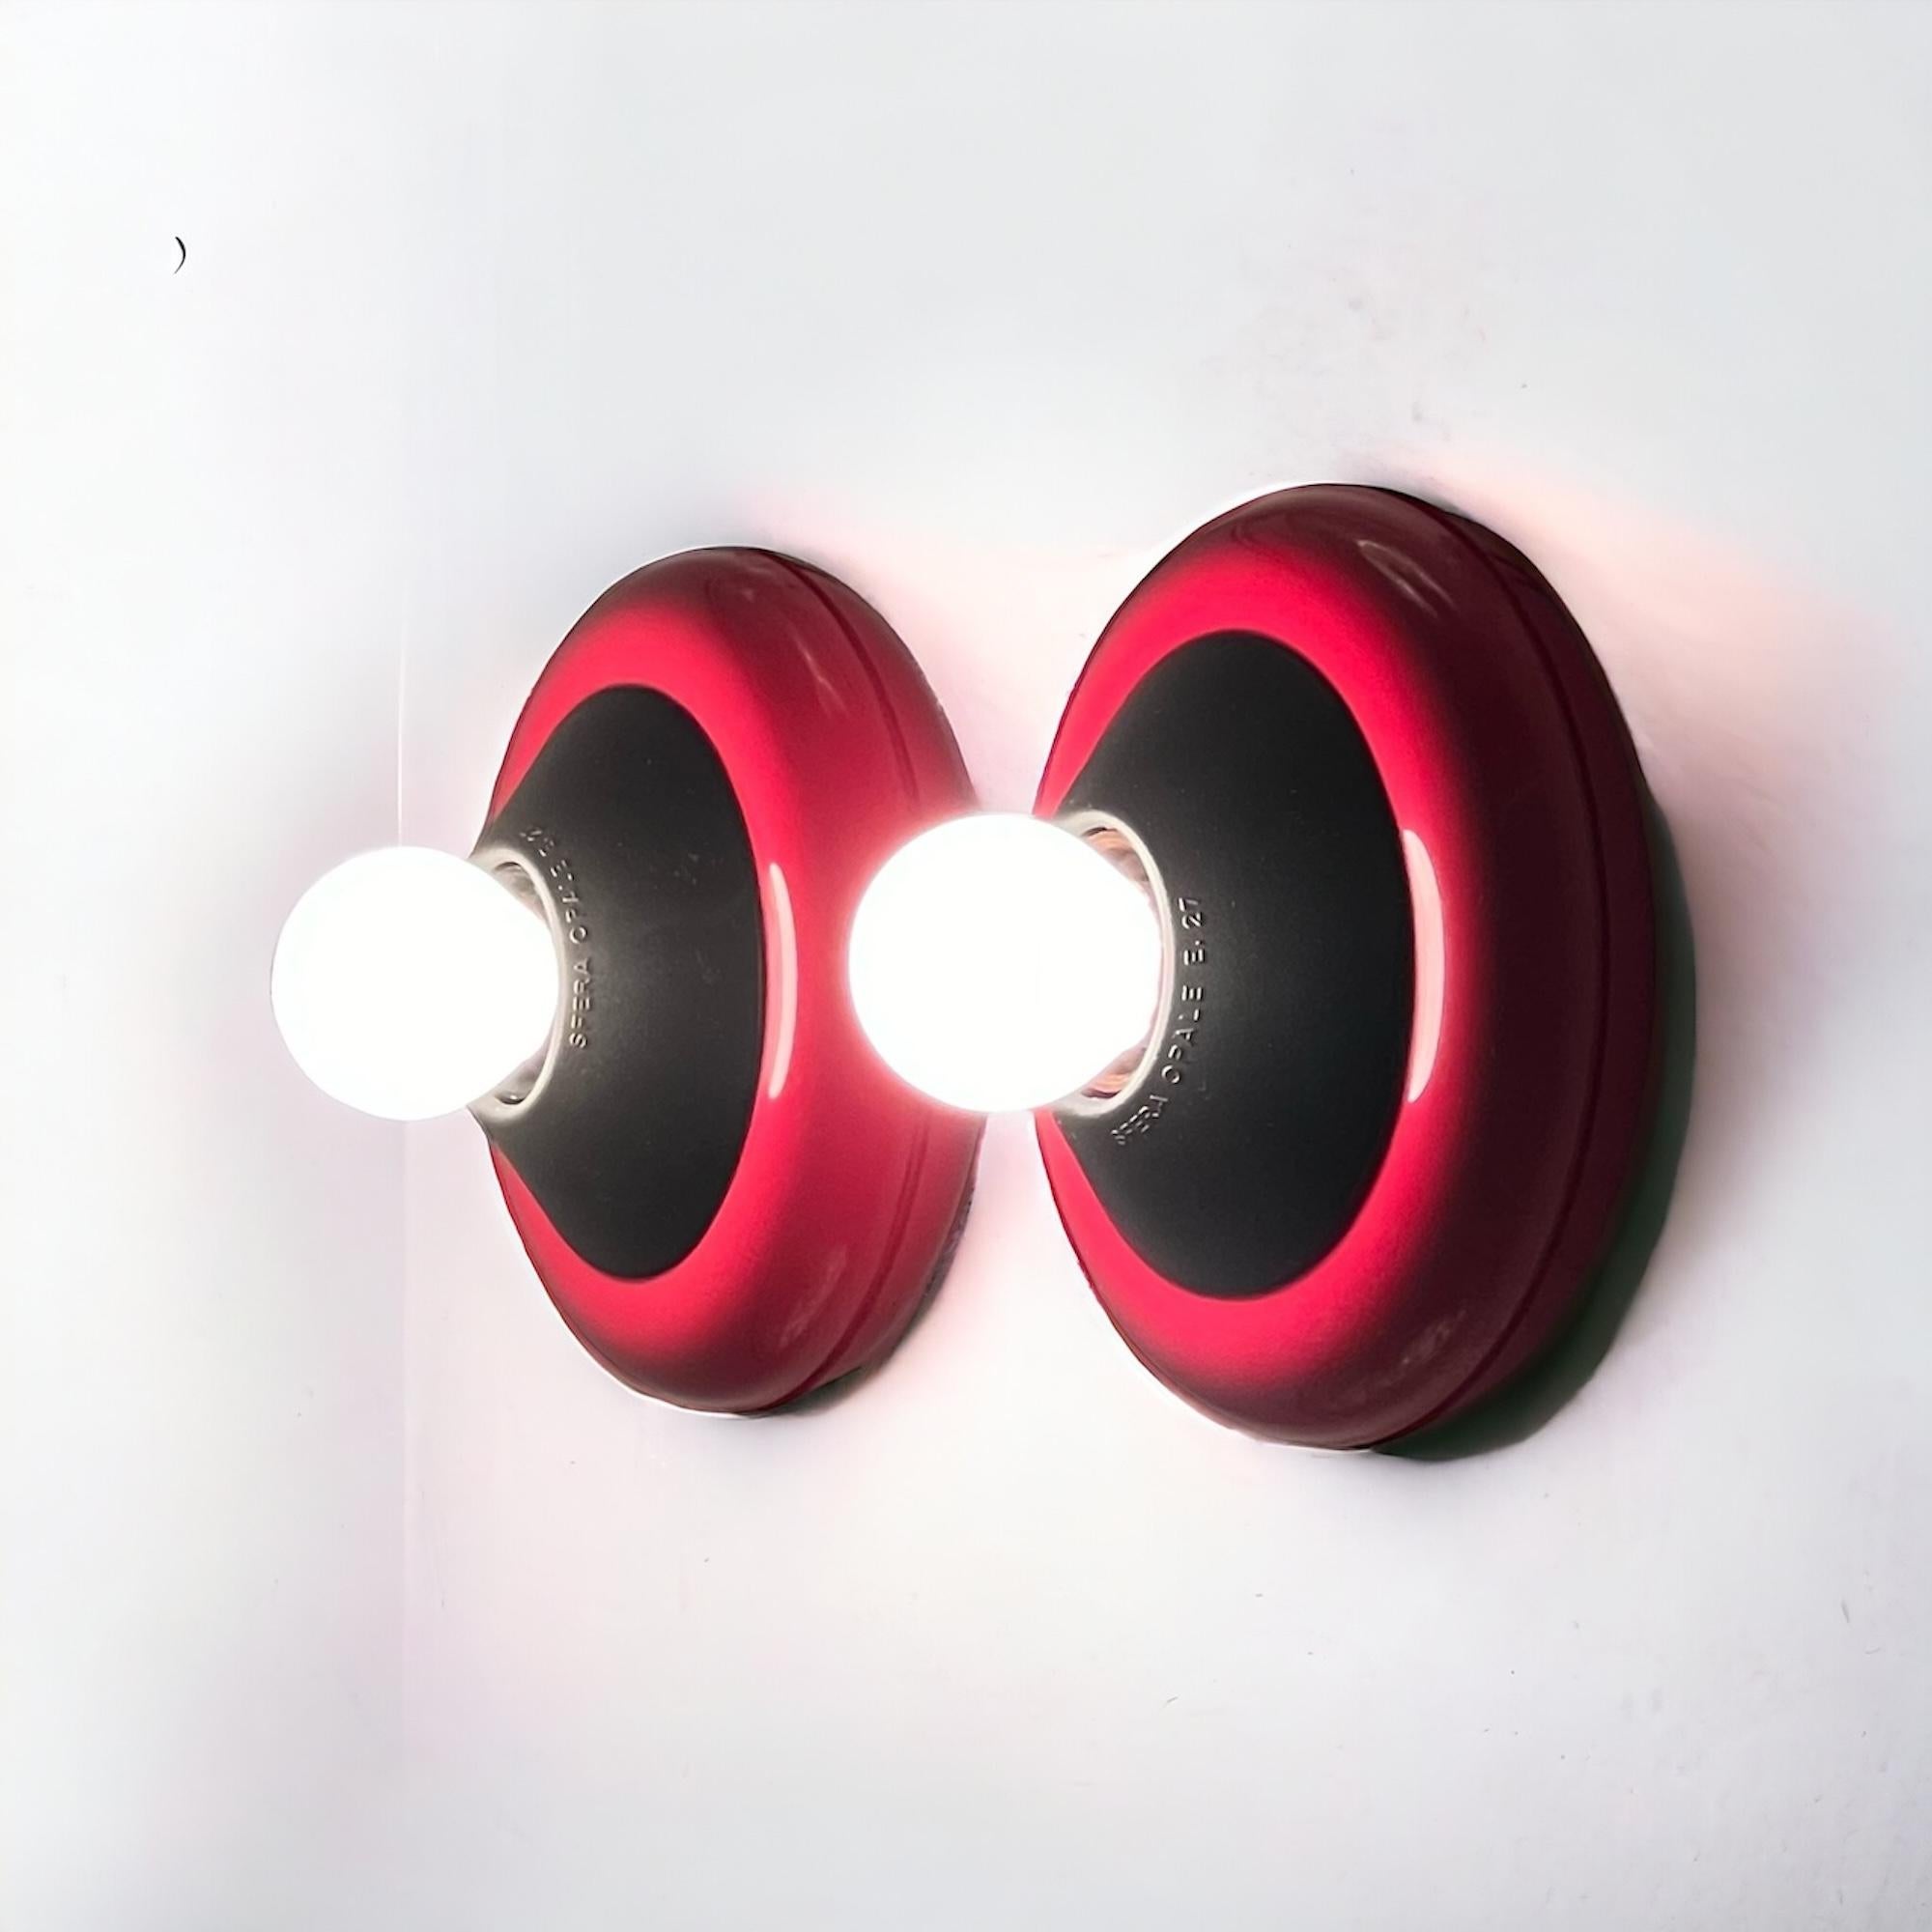 Step into the vibrant world of 1980s design with Luci Milano’s iconic ‘Flopi’ flush mount lamps. Designed by Tresoldi & Salvati, these lamps boast a sleek and minimalistic shape infused with the unmistakable energy of the era. With a striking red